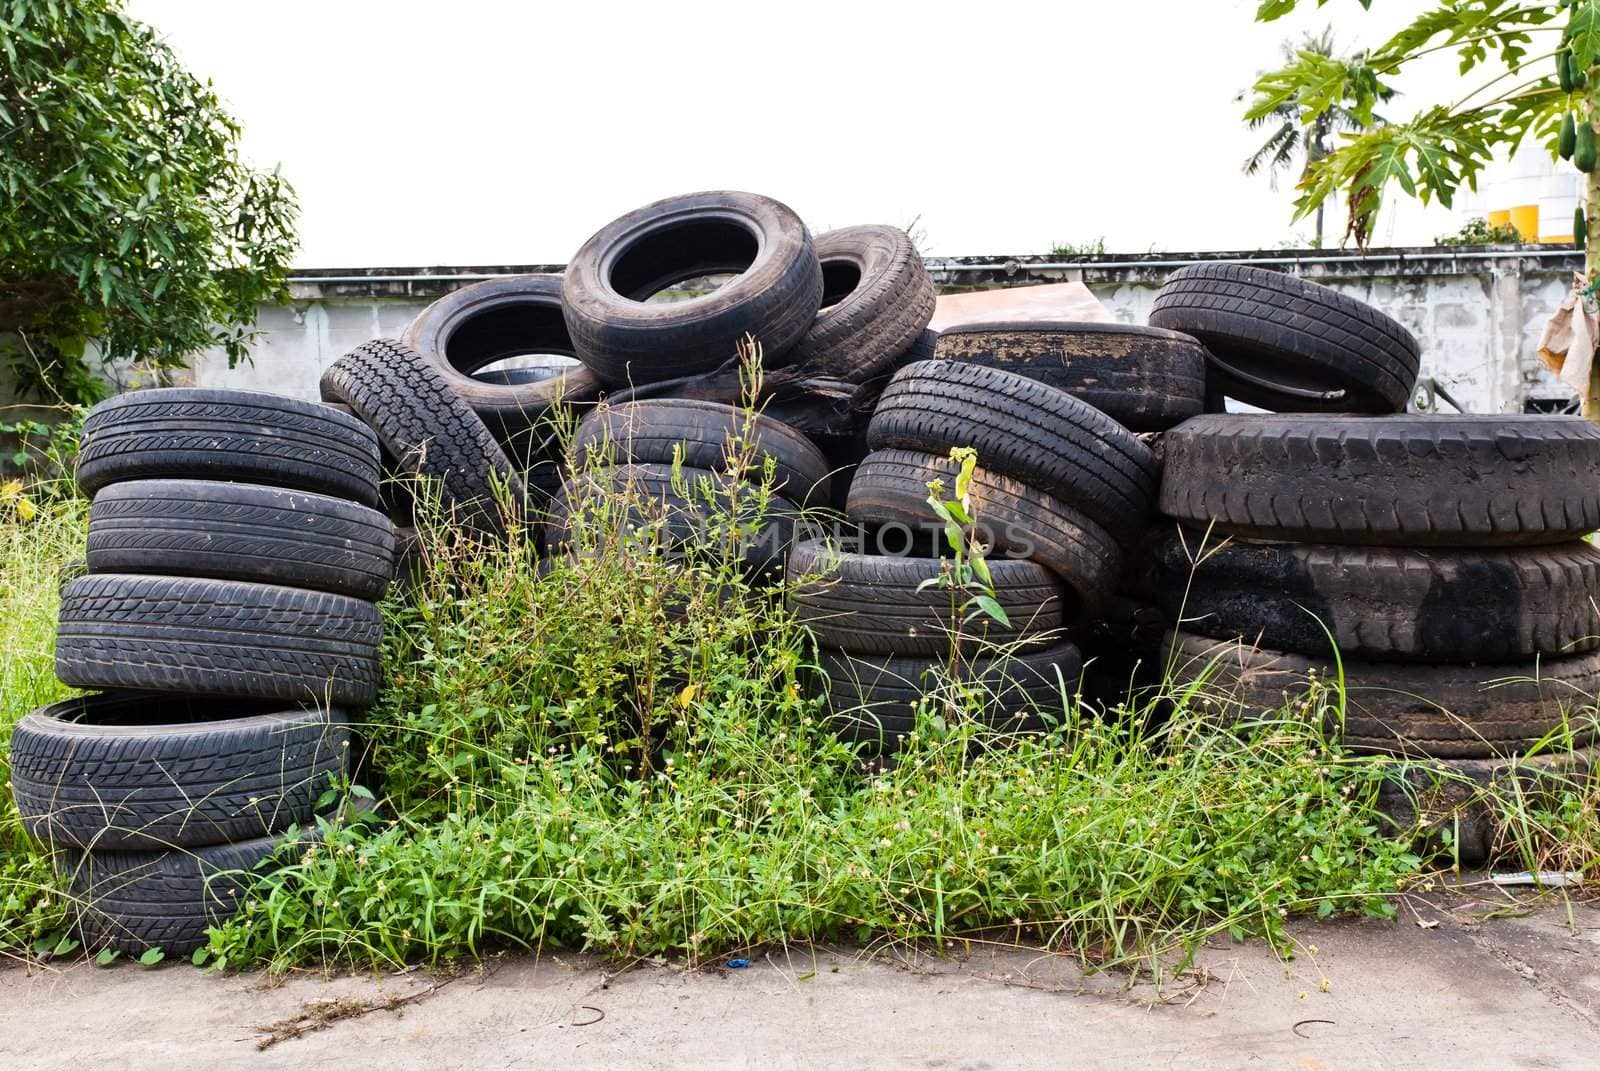 Old road tires stacked on grass land
 by sasilsolutions